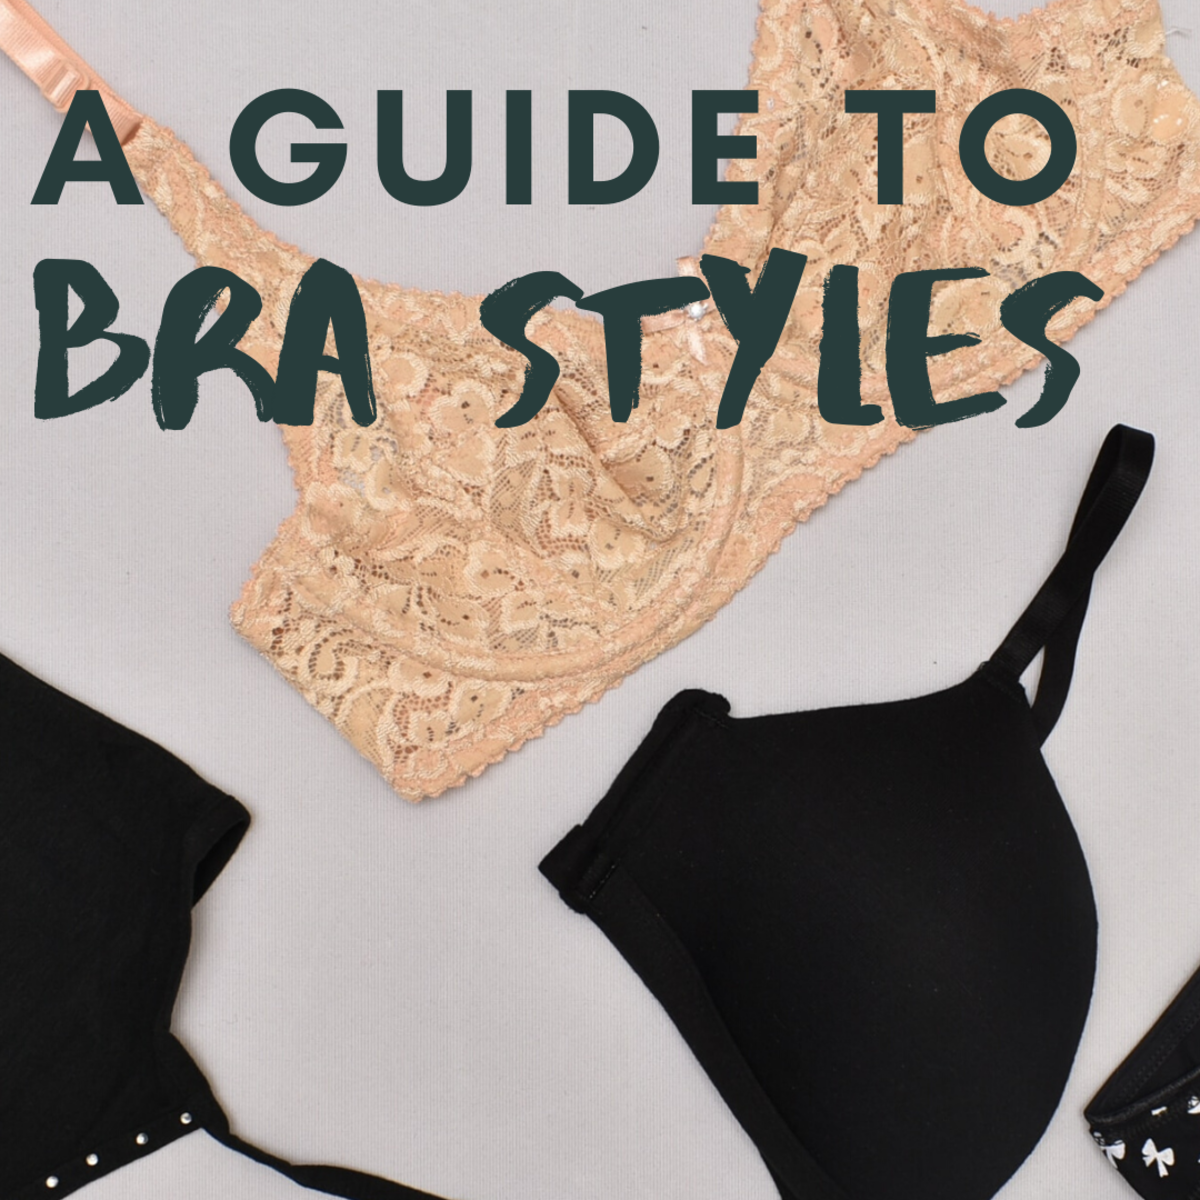  An Illustrated Guide to Bras (Brassieres)